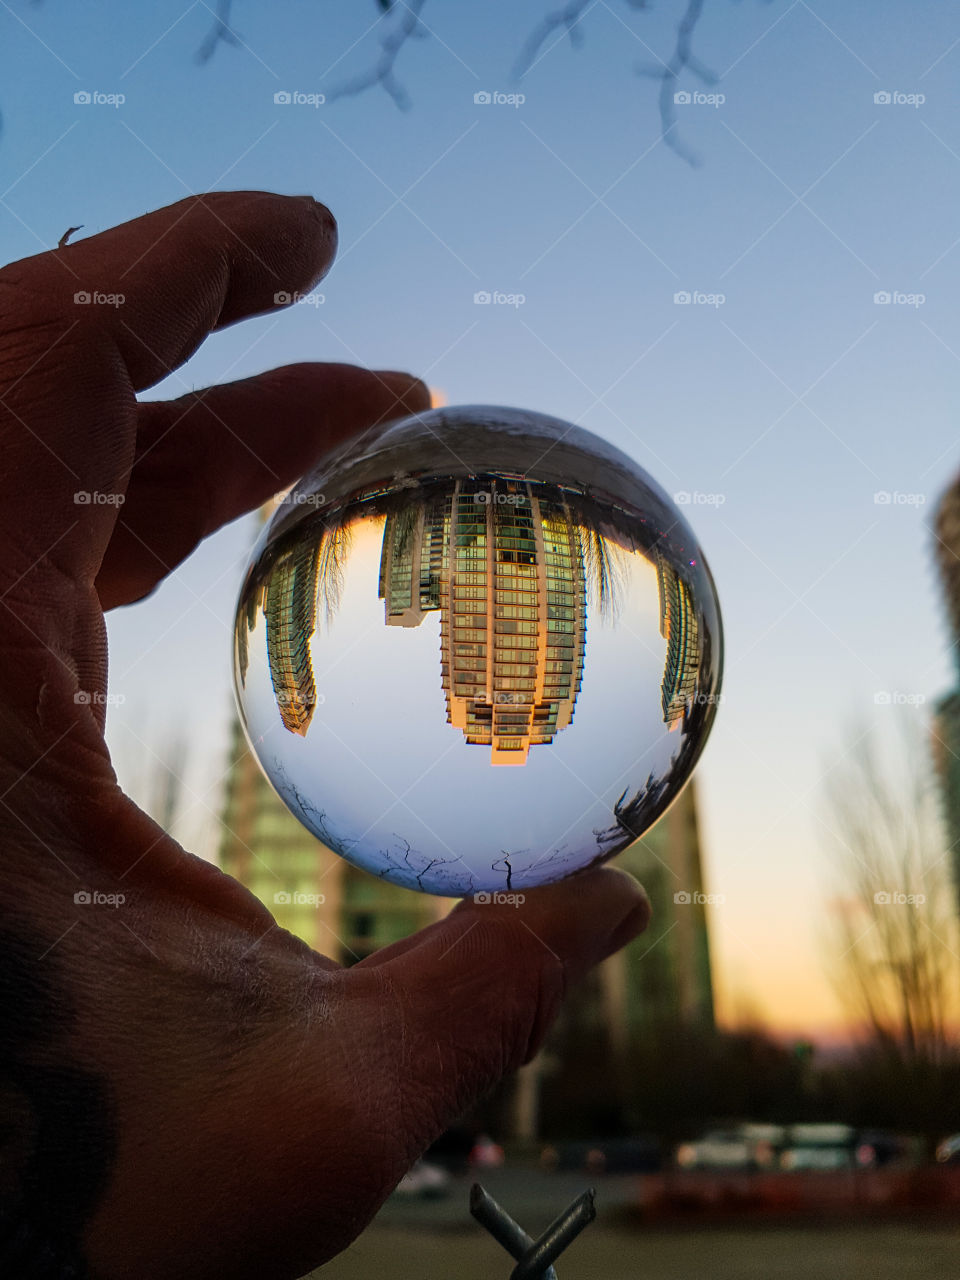 building in glass sphere